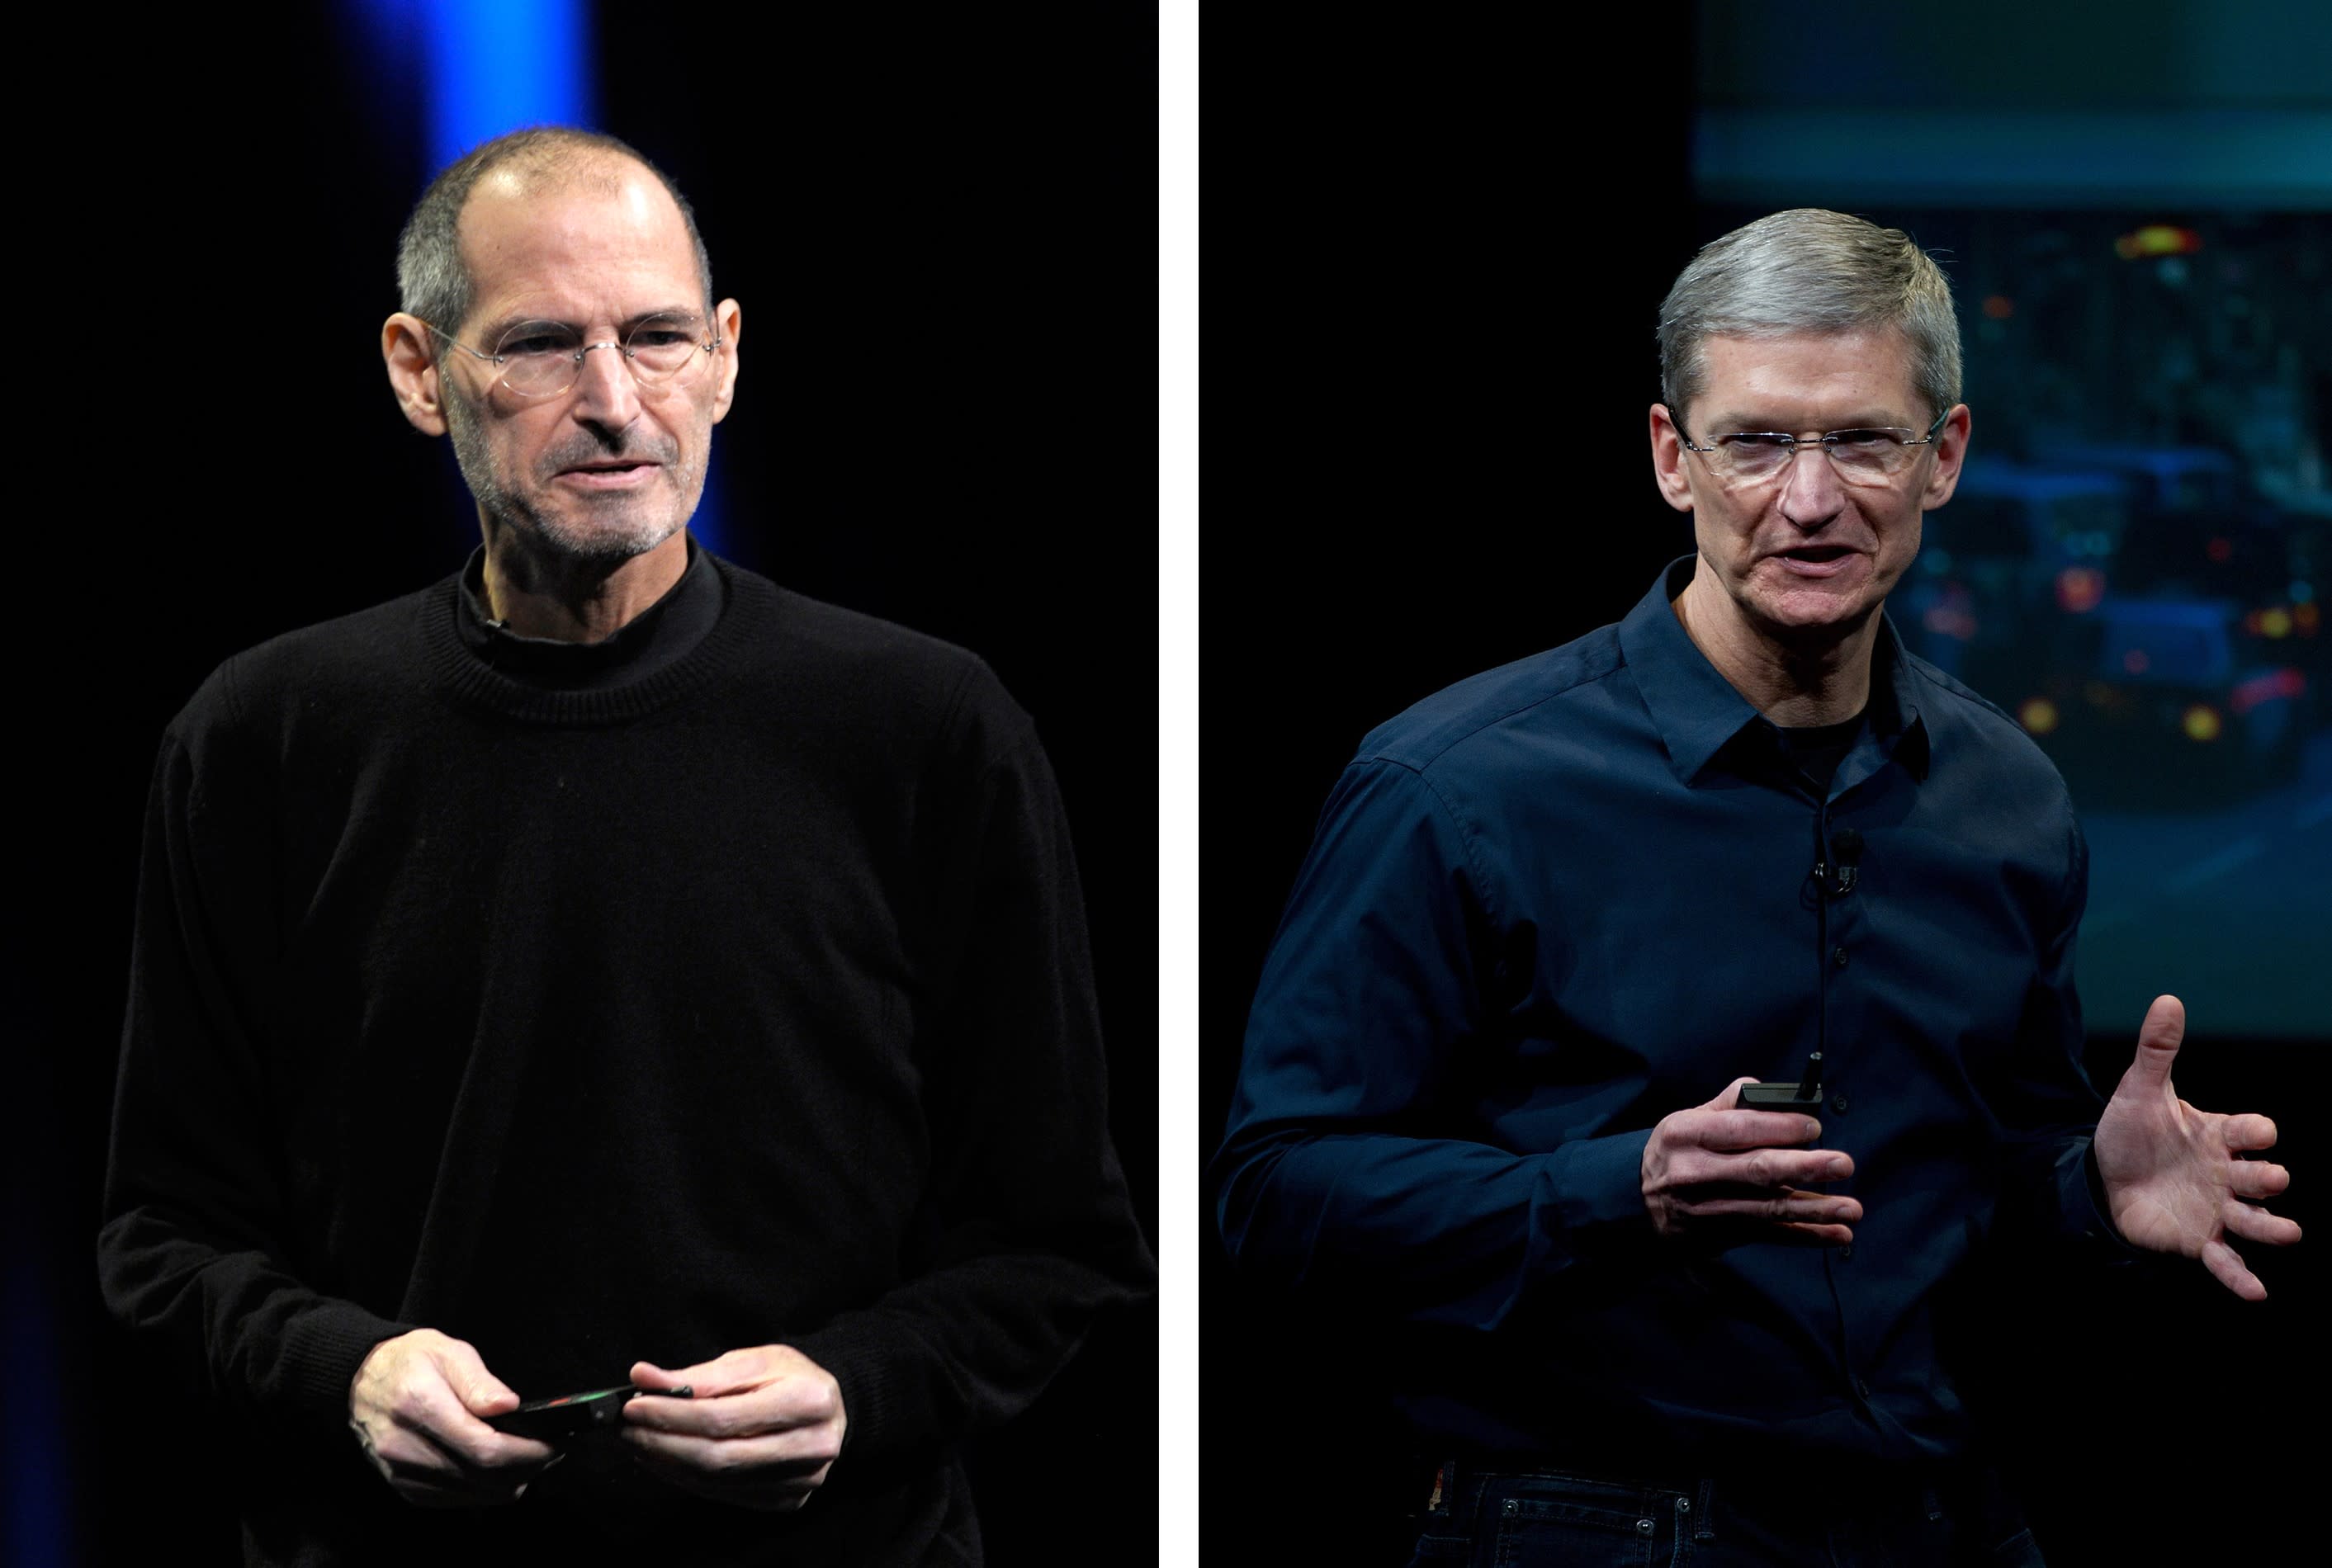 Steve Jobs was legendary, and Tim Cook a 'genius,' says author